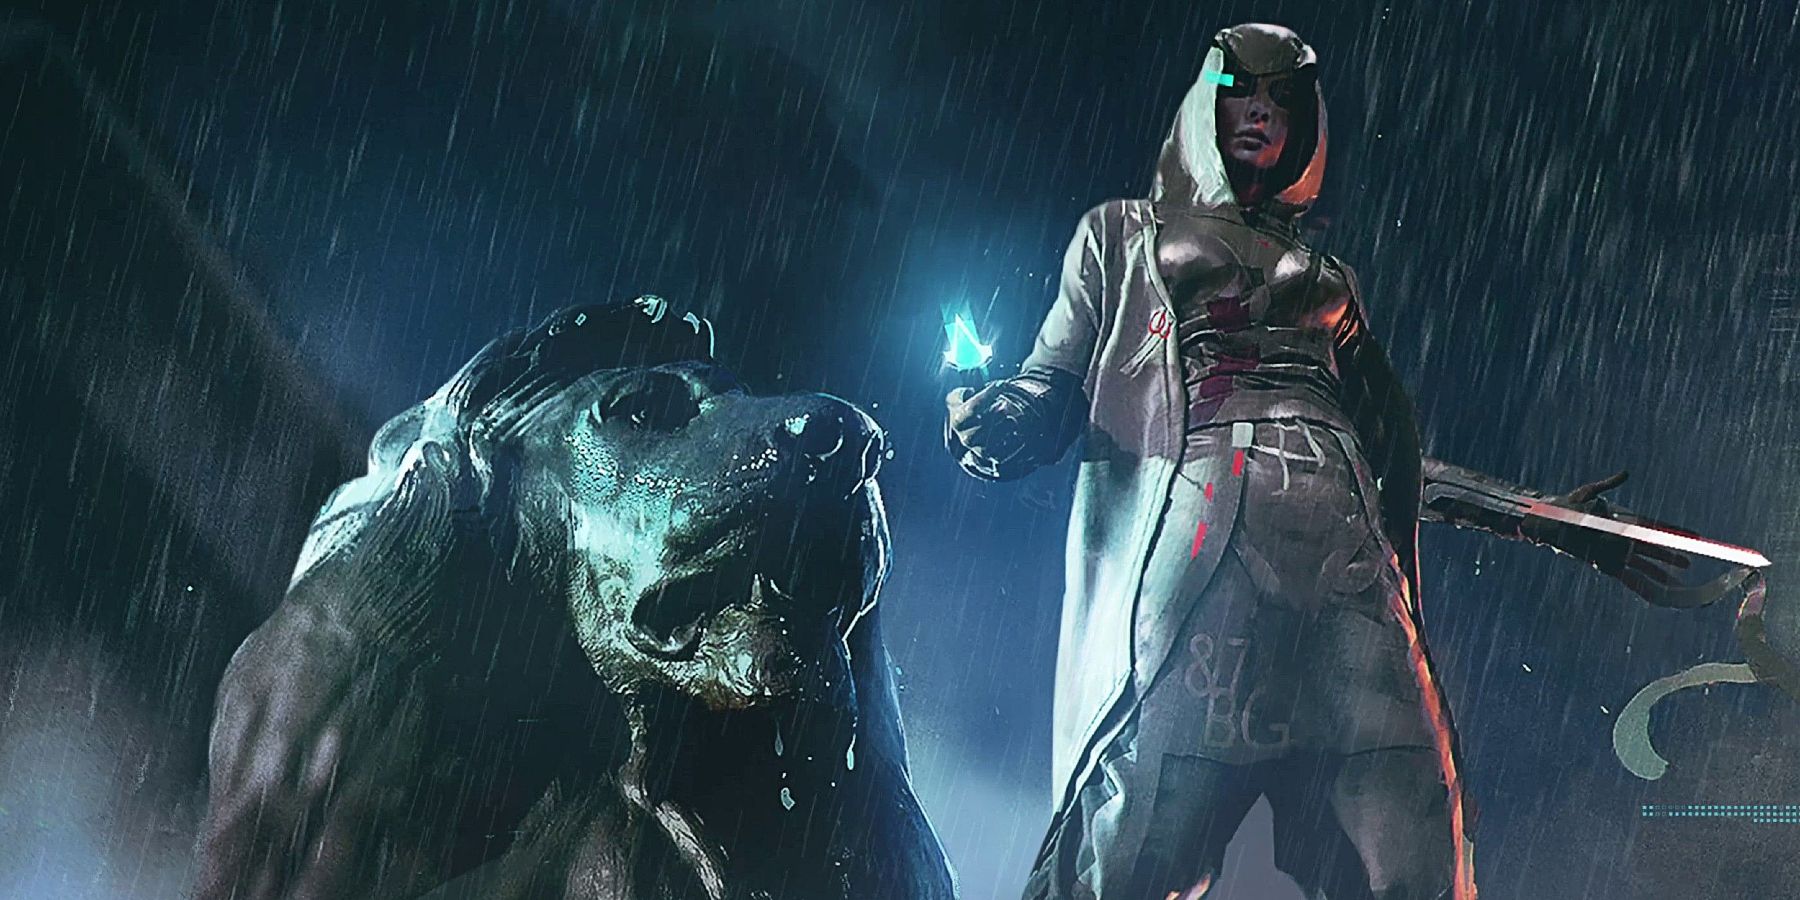 Watch Dogs: Legion’s Darcy Deserves Her Own Assassin’s Creed Game